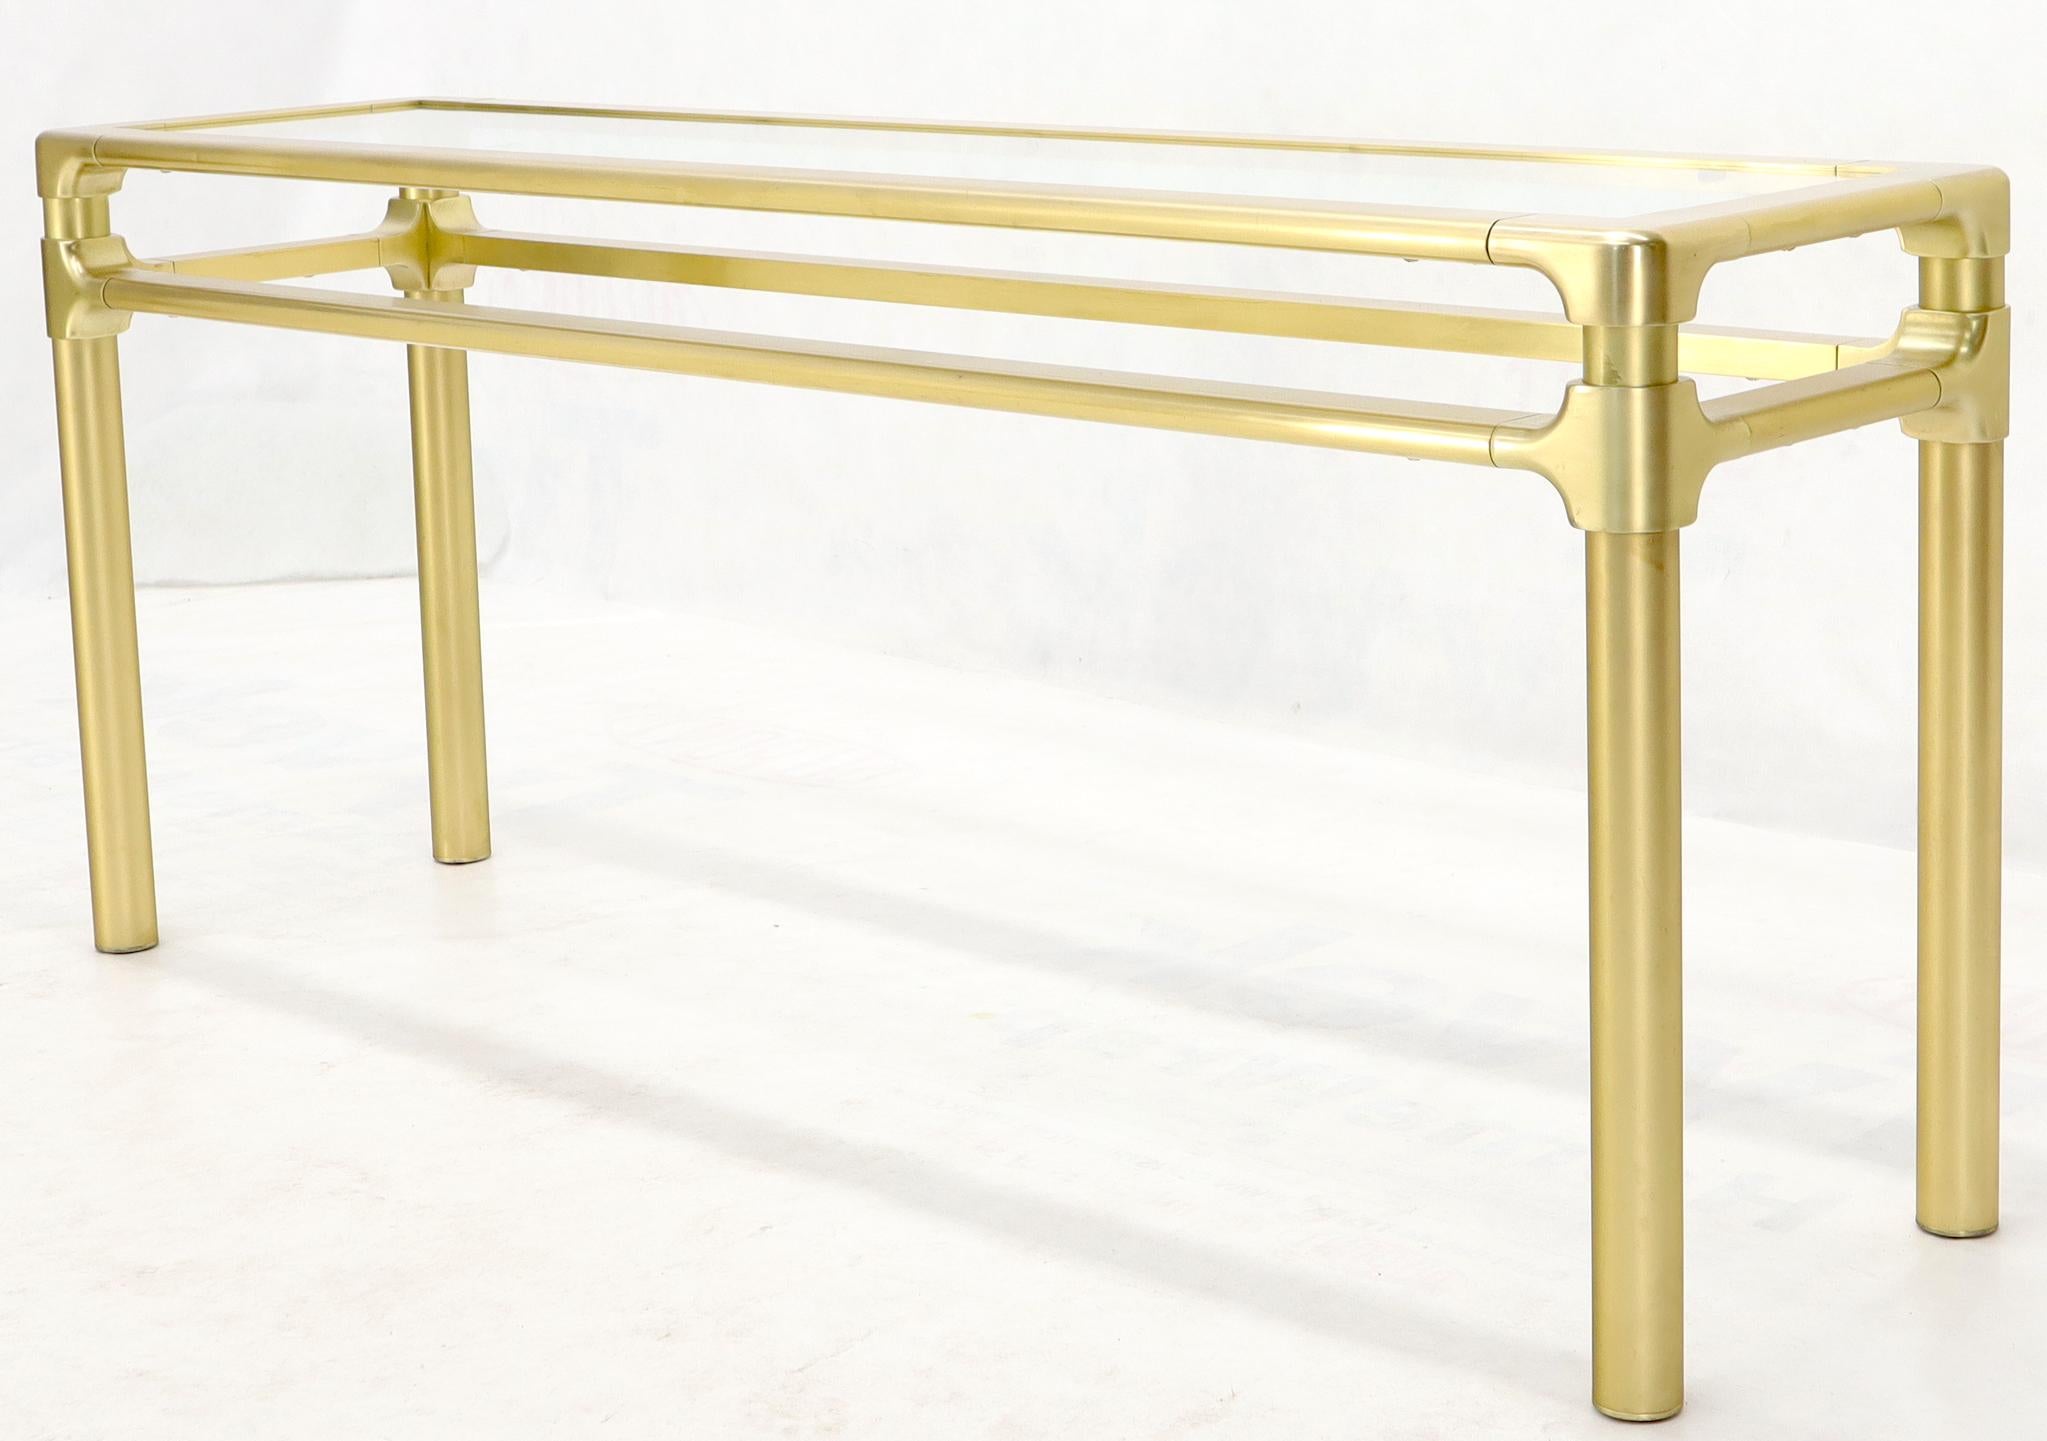 Solid Brass Profile Base Glass Top Mid-Century Modern Console Sofa Table In Excellent Condition For Sale In Rockaway, NJ